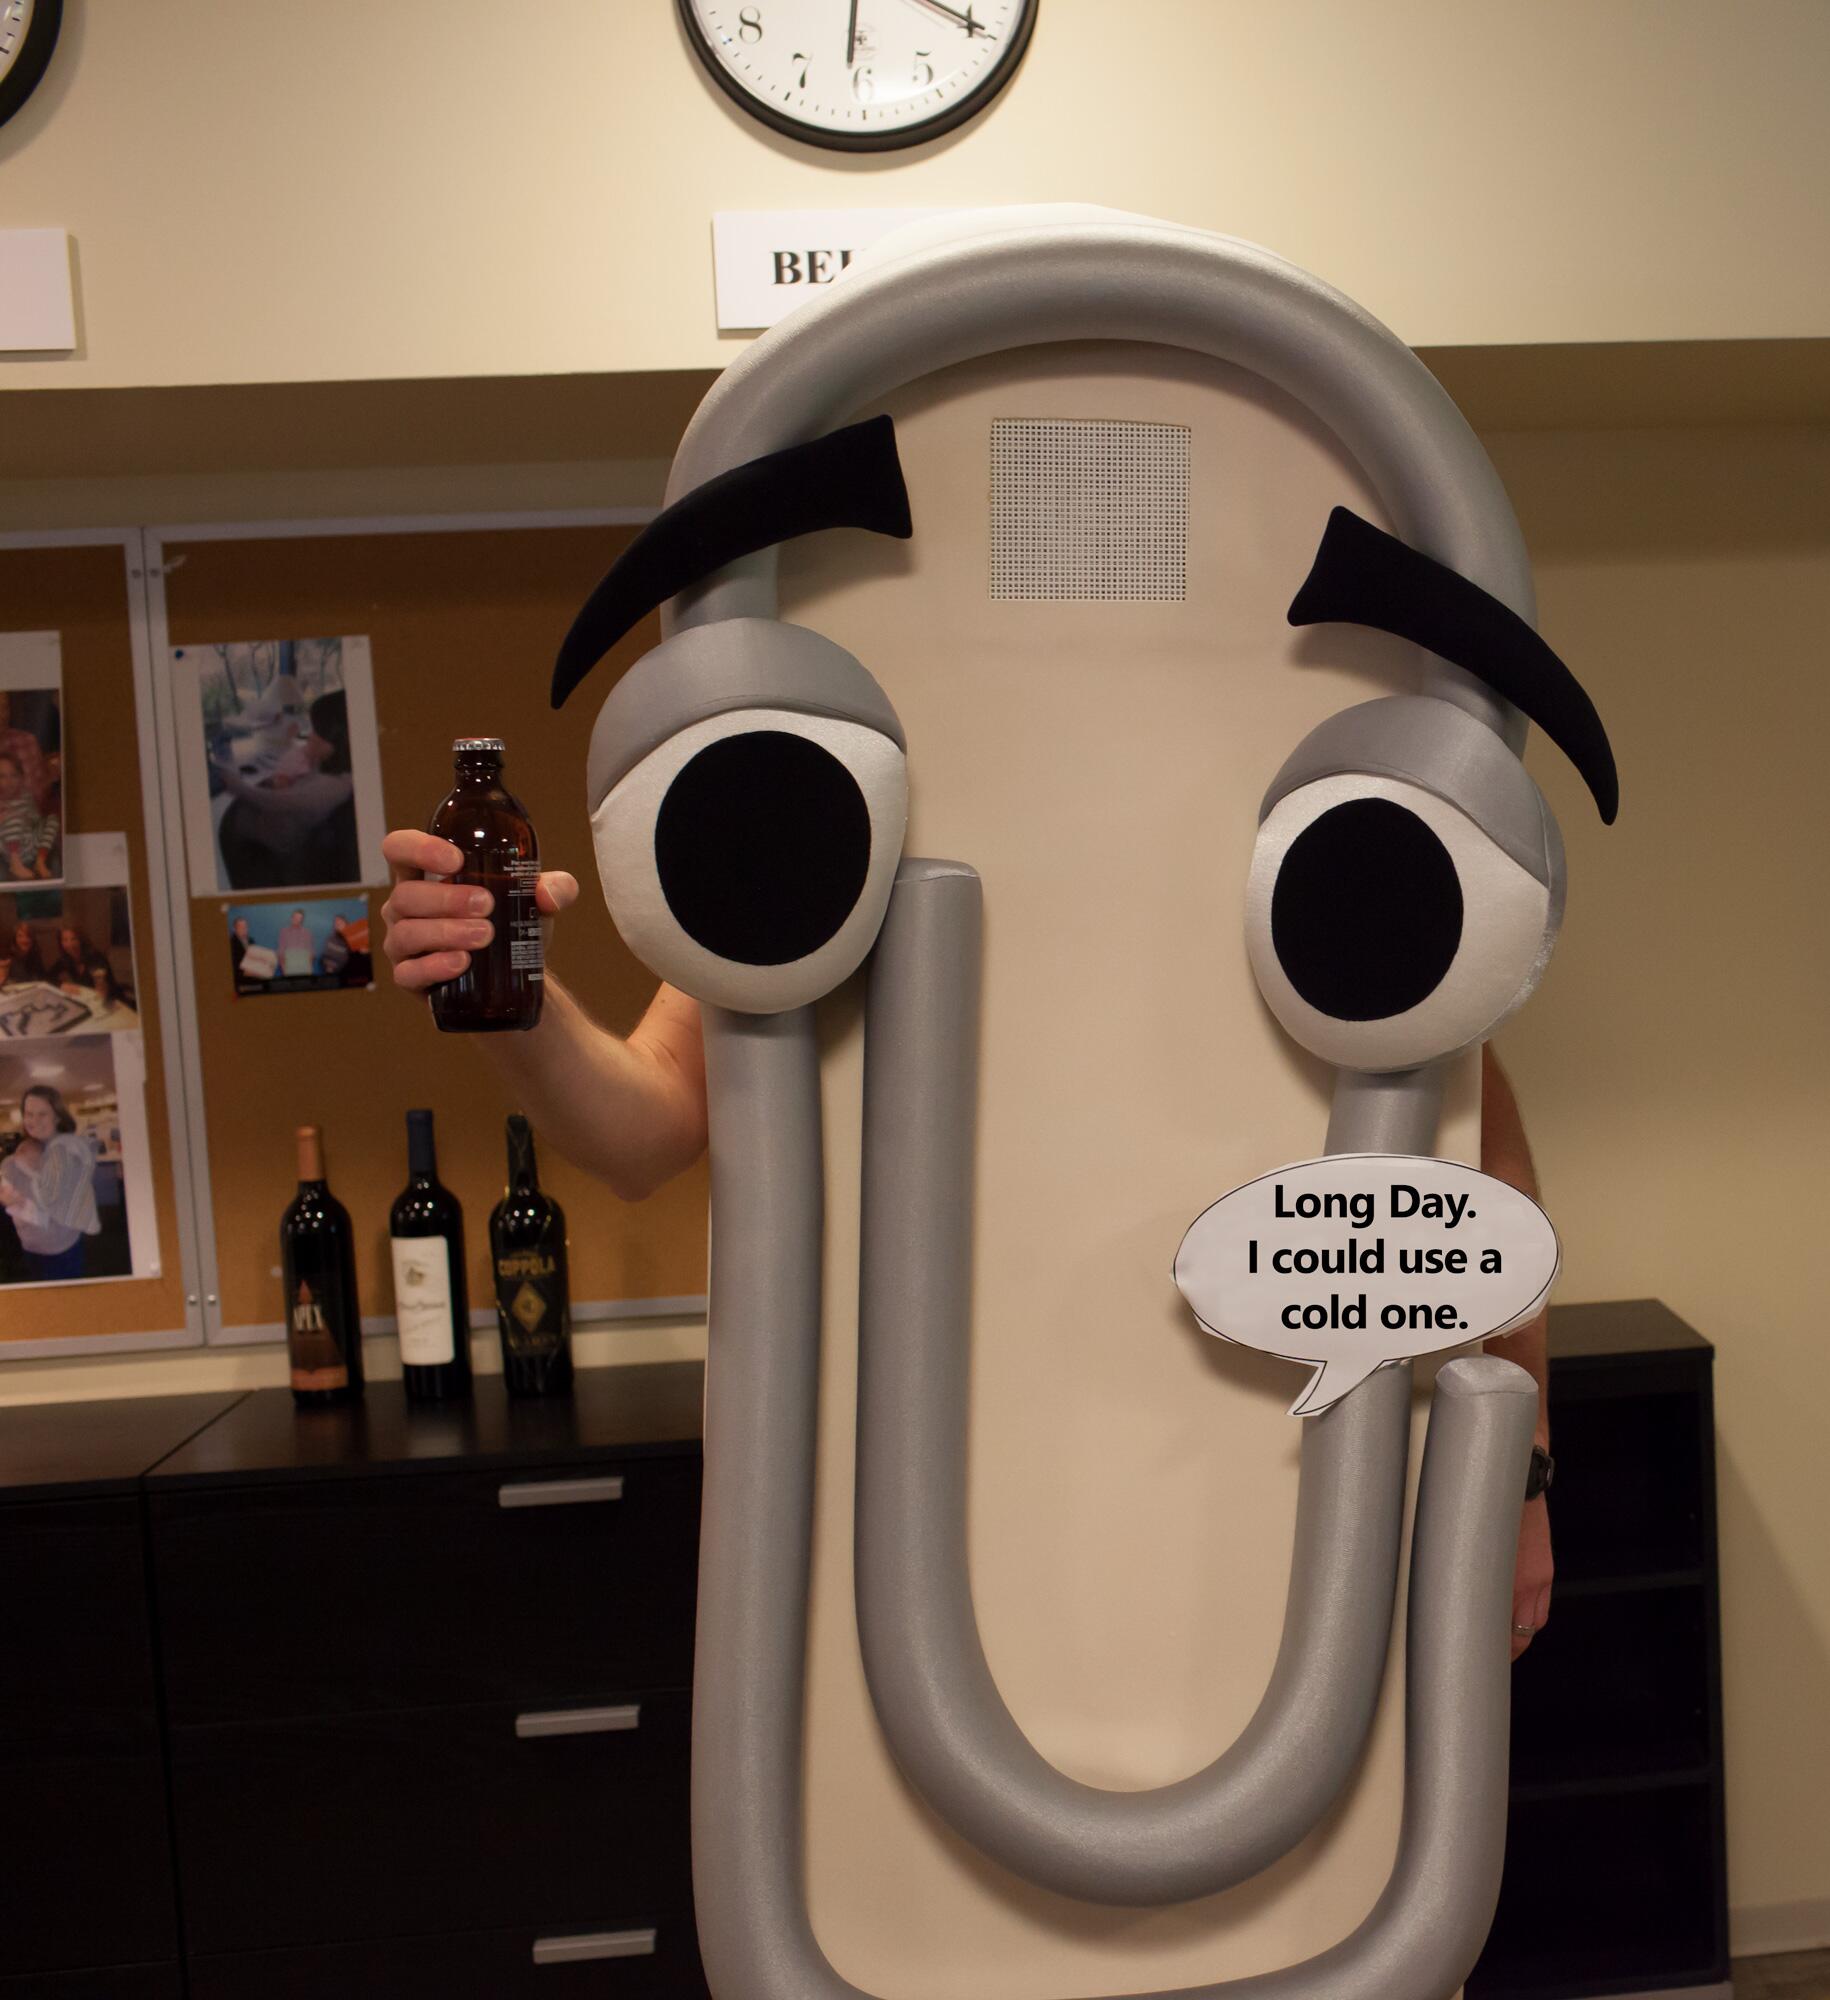 Nice benefit of the job? clippy delivers. 